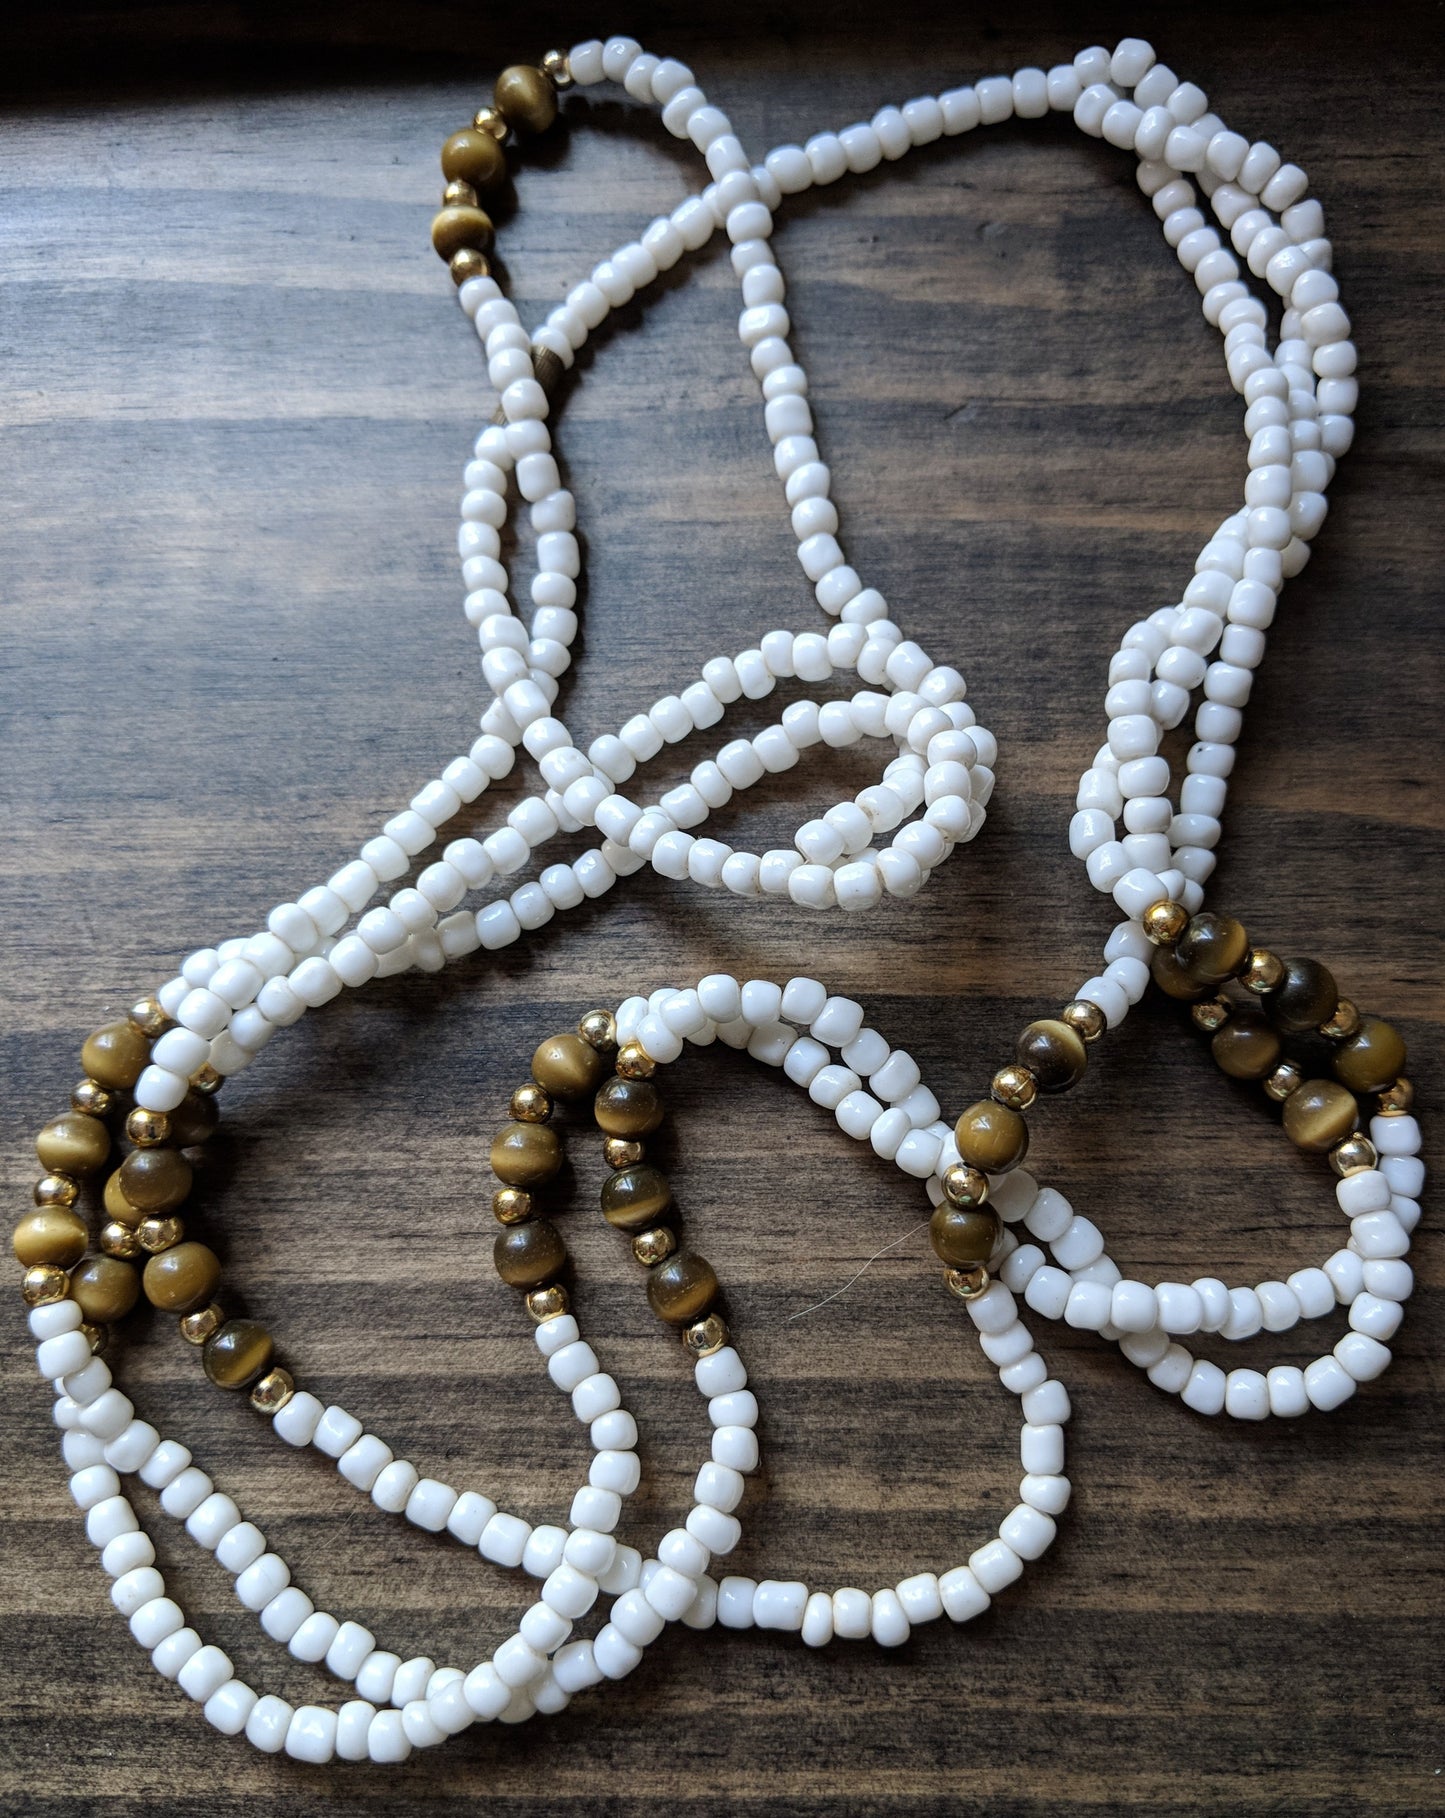 Vintage 60s Triple Strand Necklace Twisted White Beads w/ Tiger Eye Accent